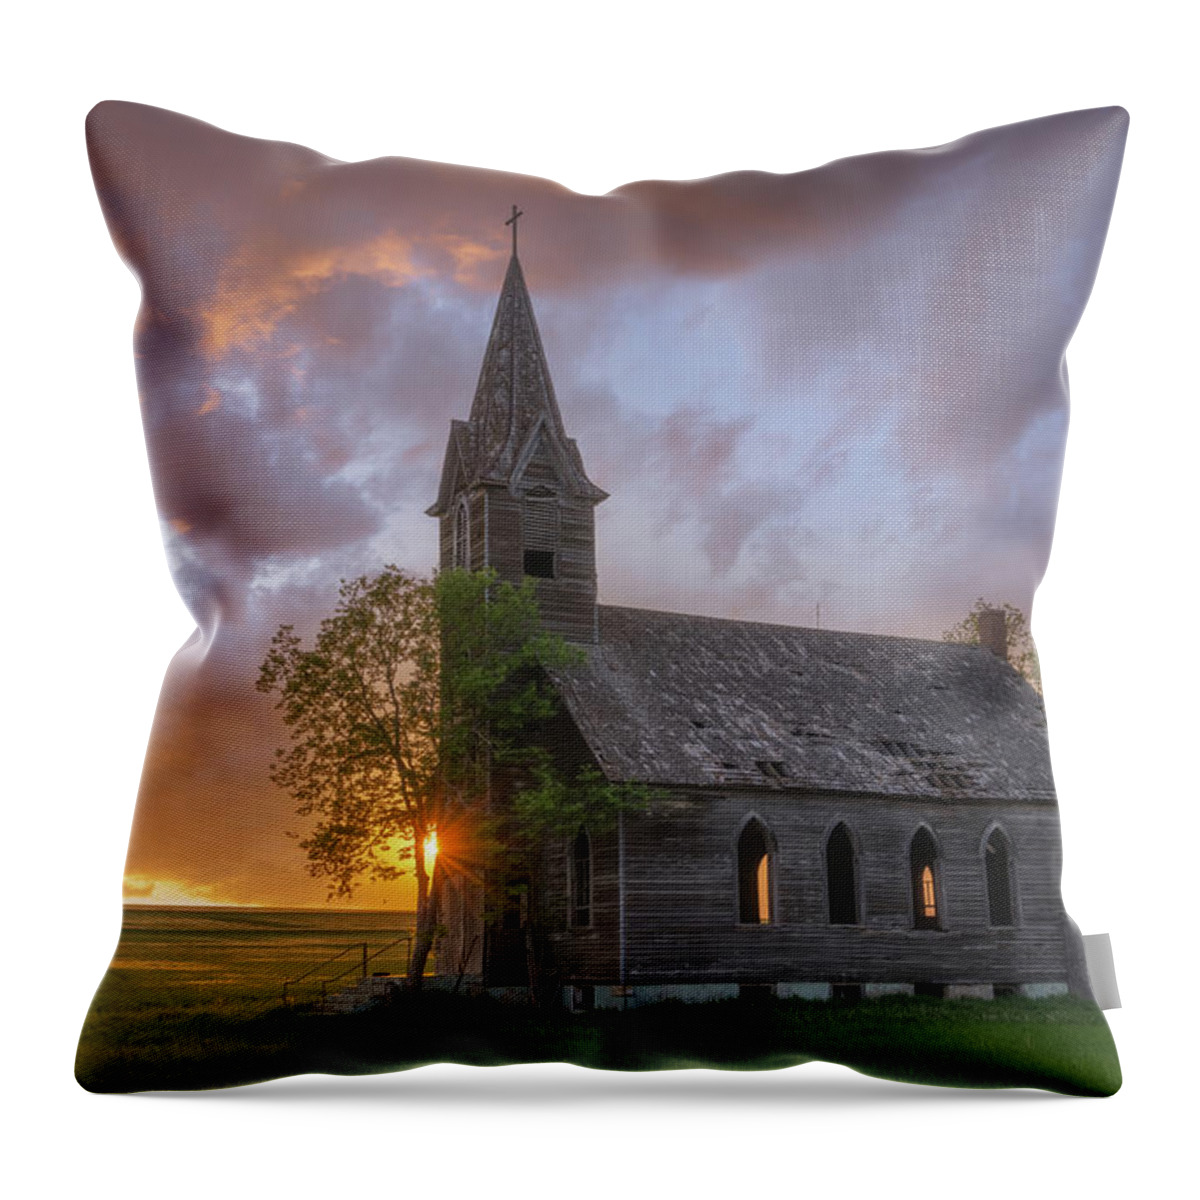 Sunset Throw Pillow featuring the photograph Heavenly Sunset by Darren White